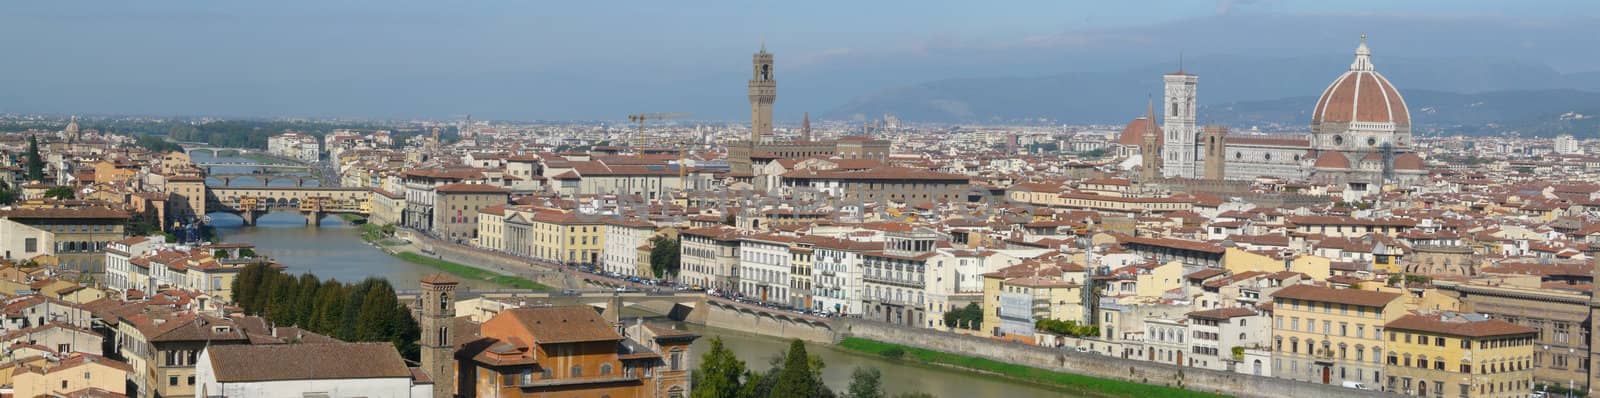 Florence overview by pljvv